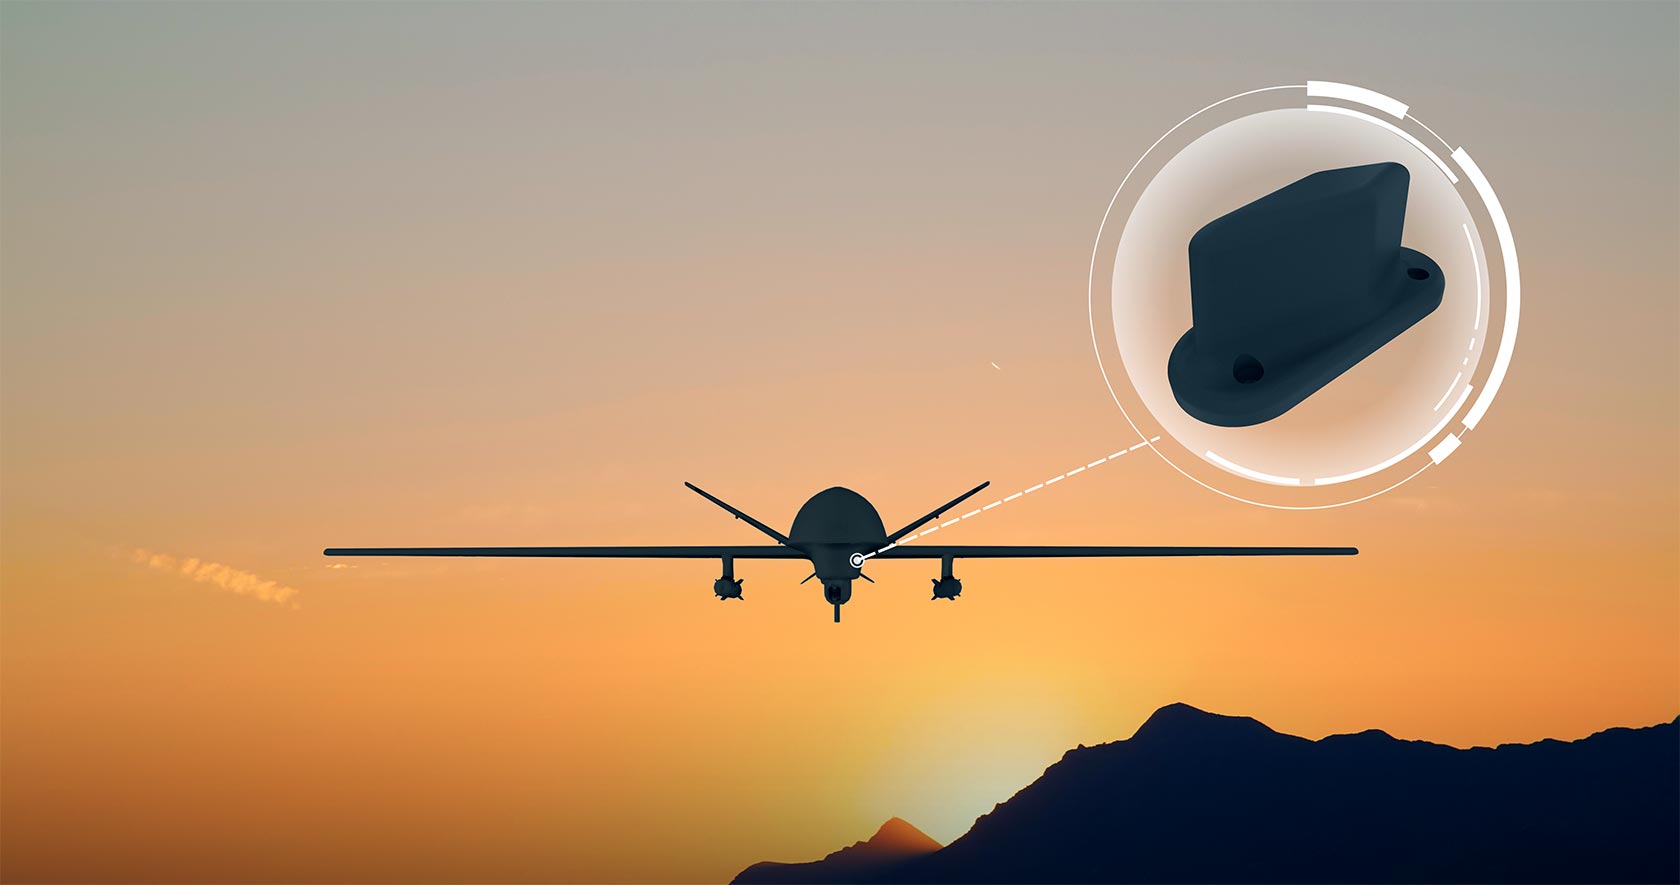 Drone flying into the sunset with a product call-out to a blade antenna from Hexagon | Antcom